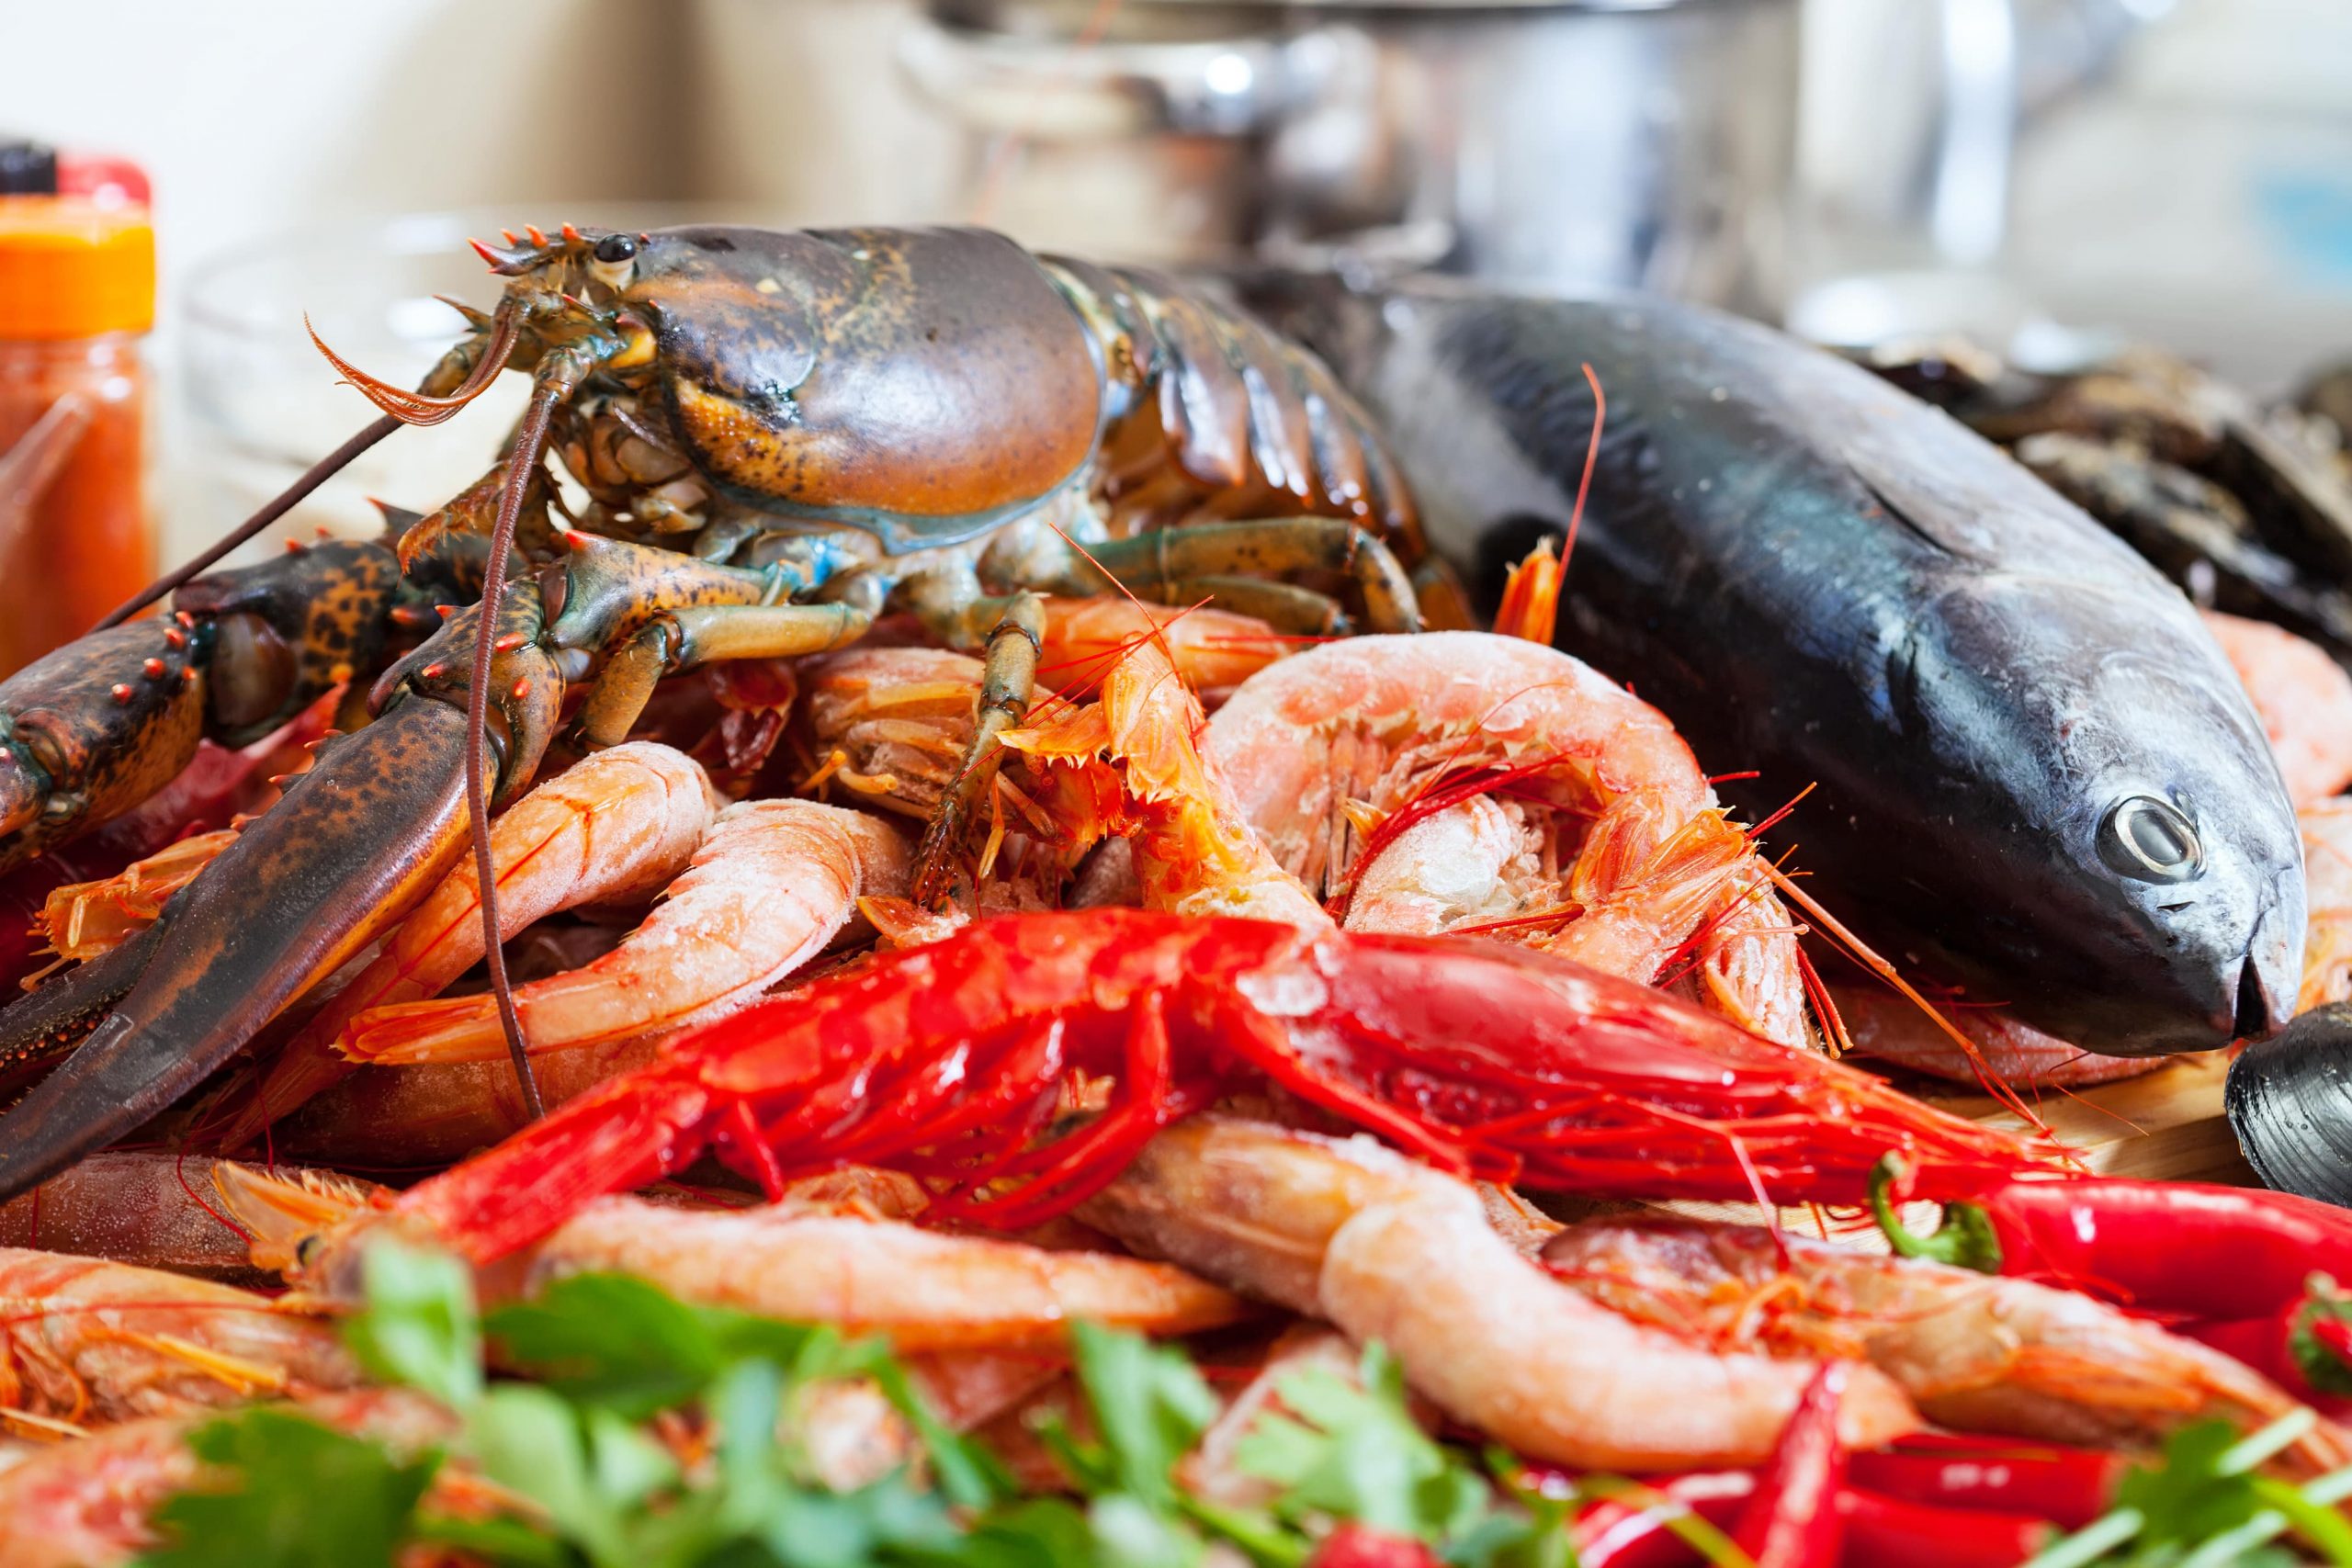 Top 3 Seafood Recipes You Should Try This Lenten Season